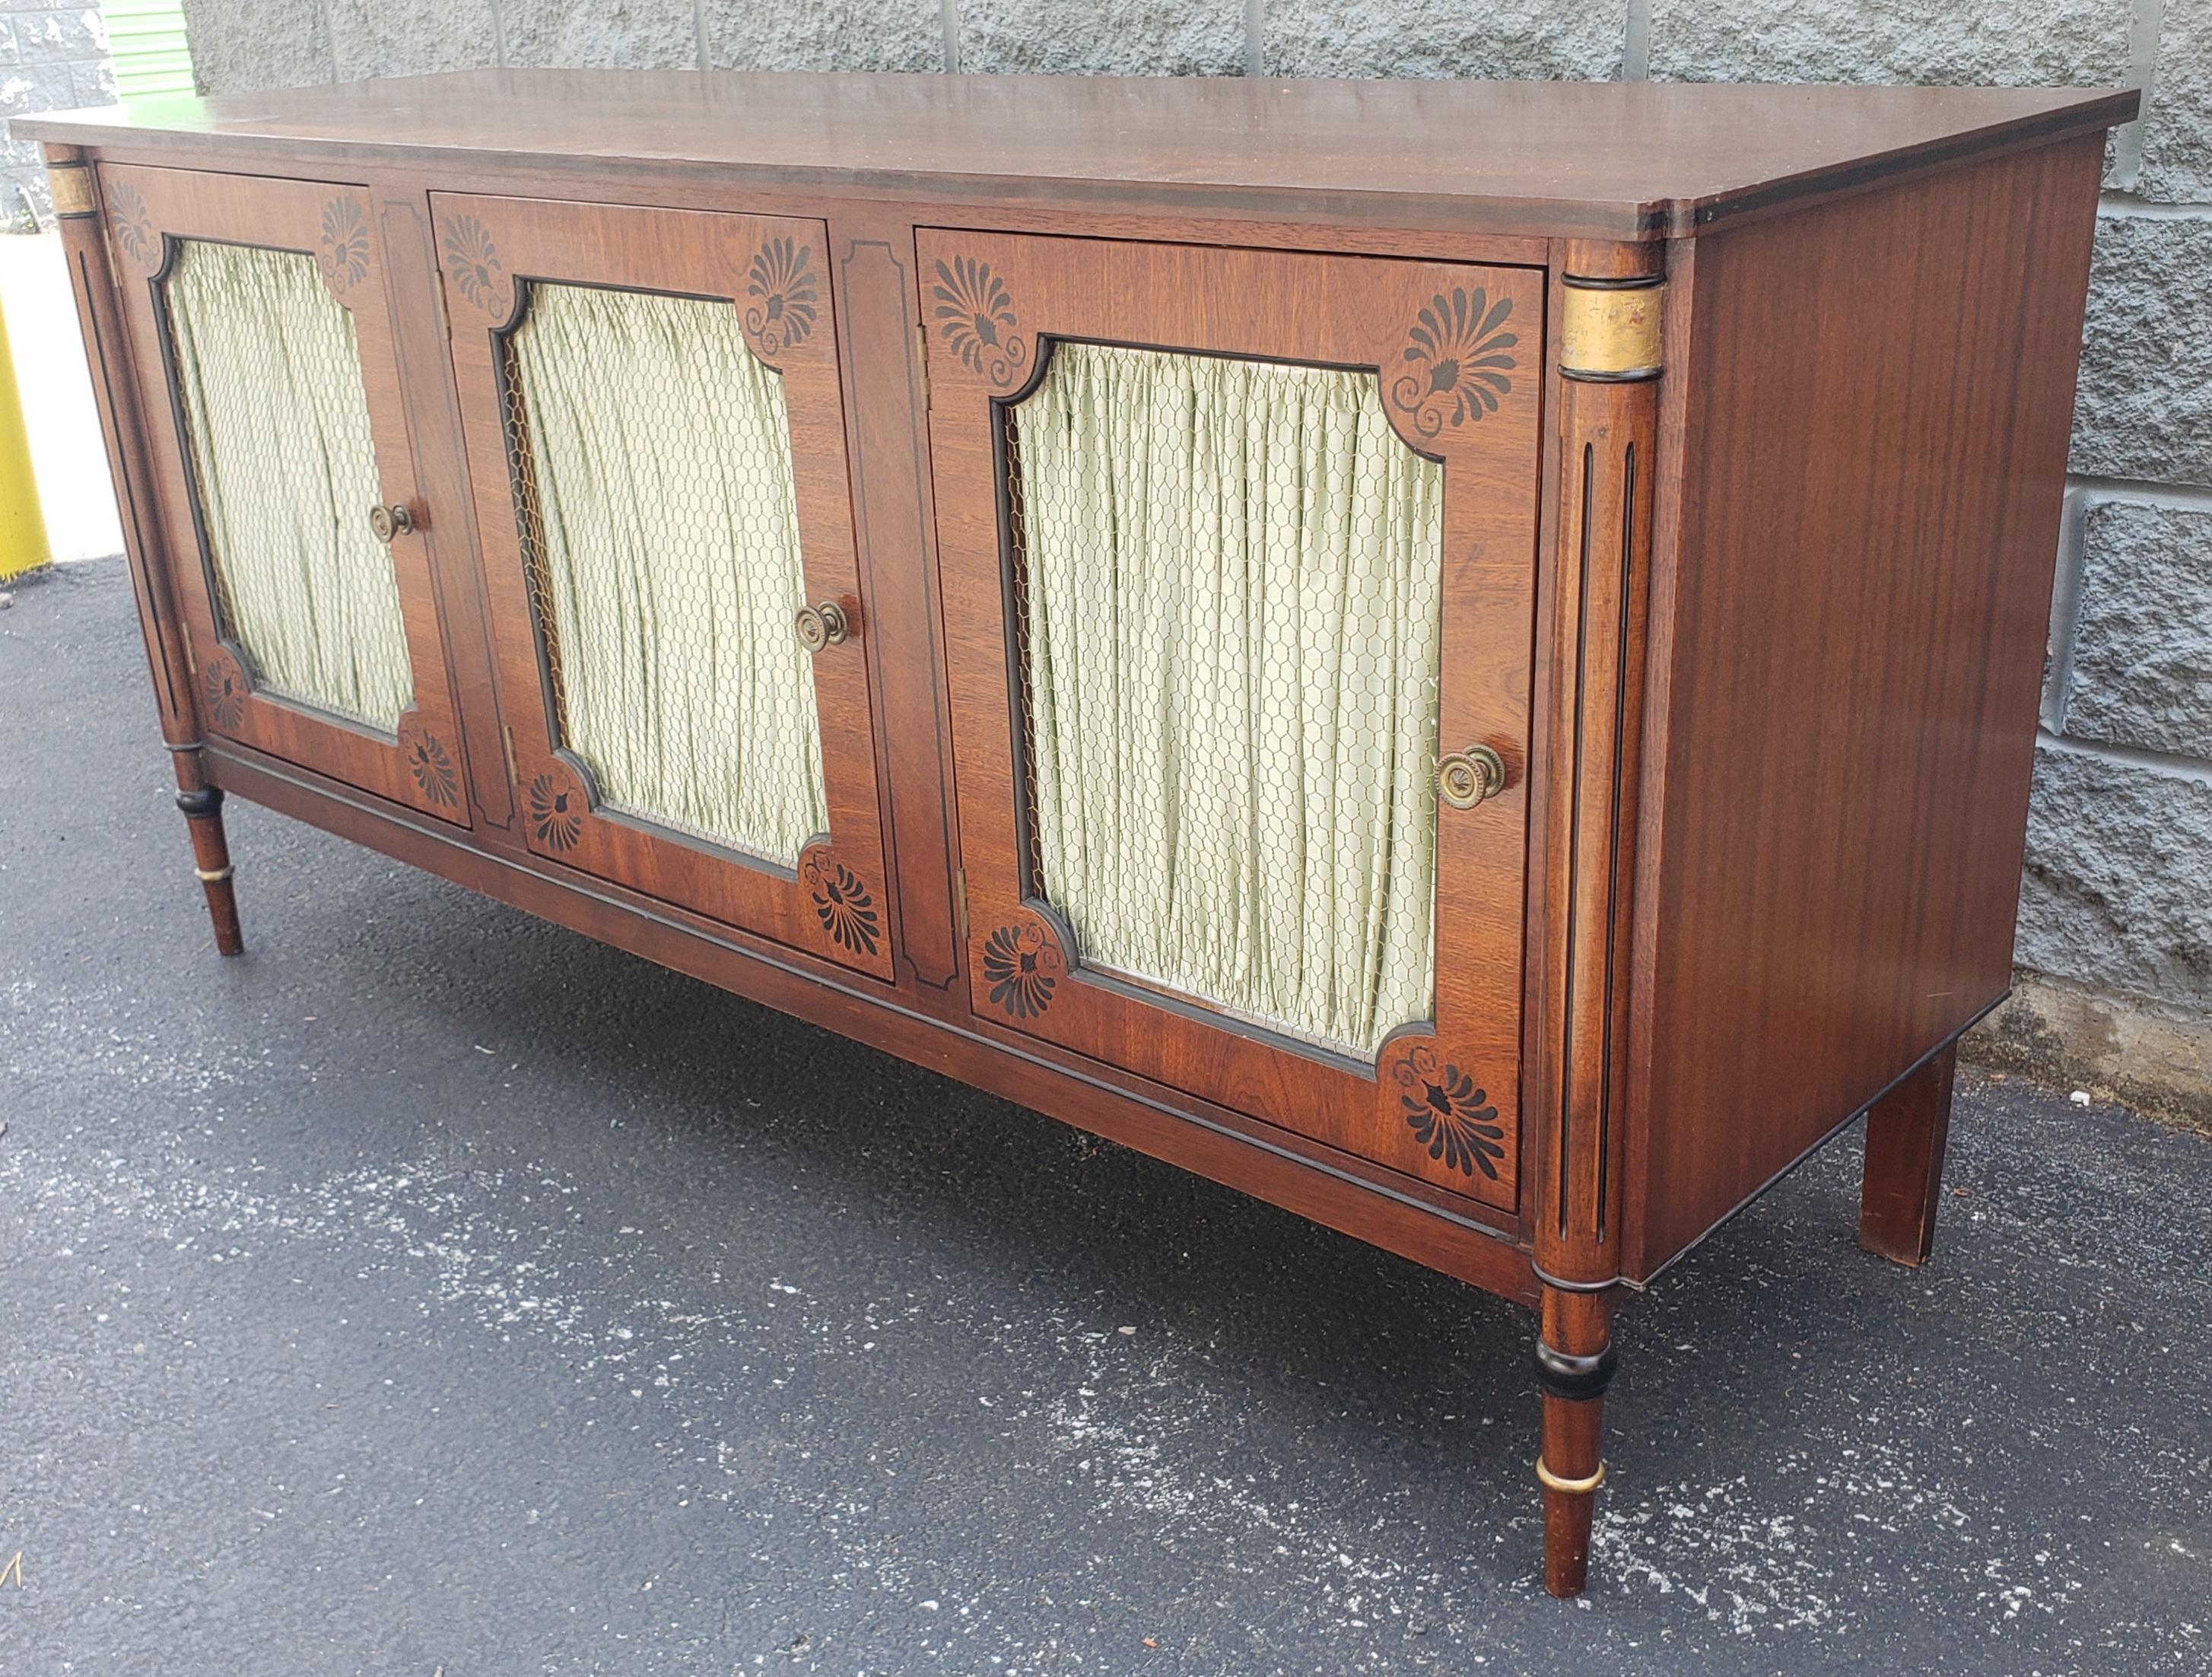 Nicholas James Neoclassic Mahogany Sideboard with Curtains and Mesh Doors 1